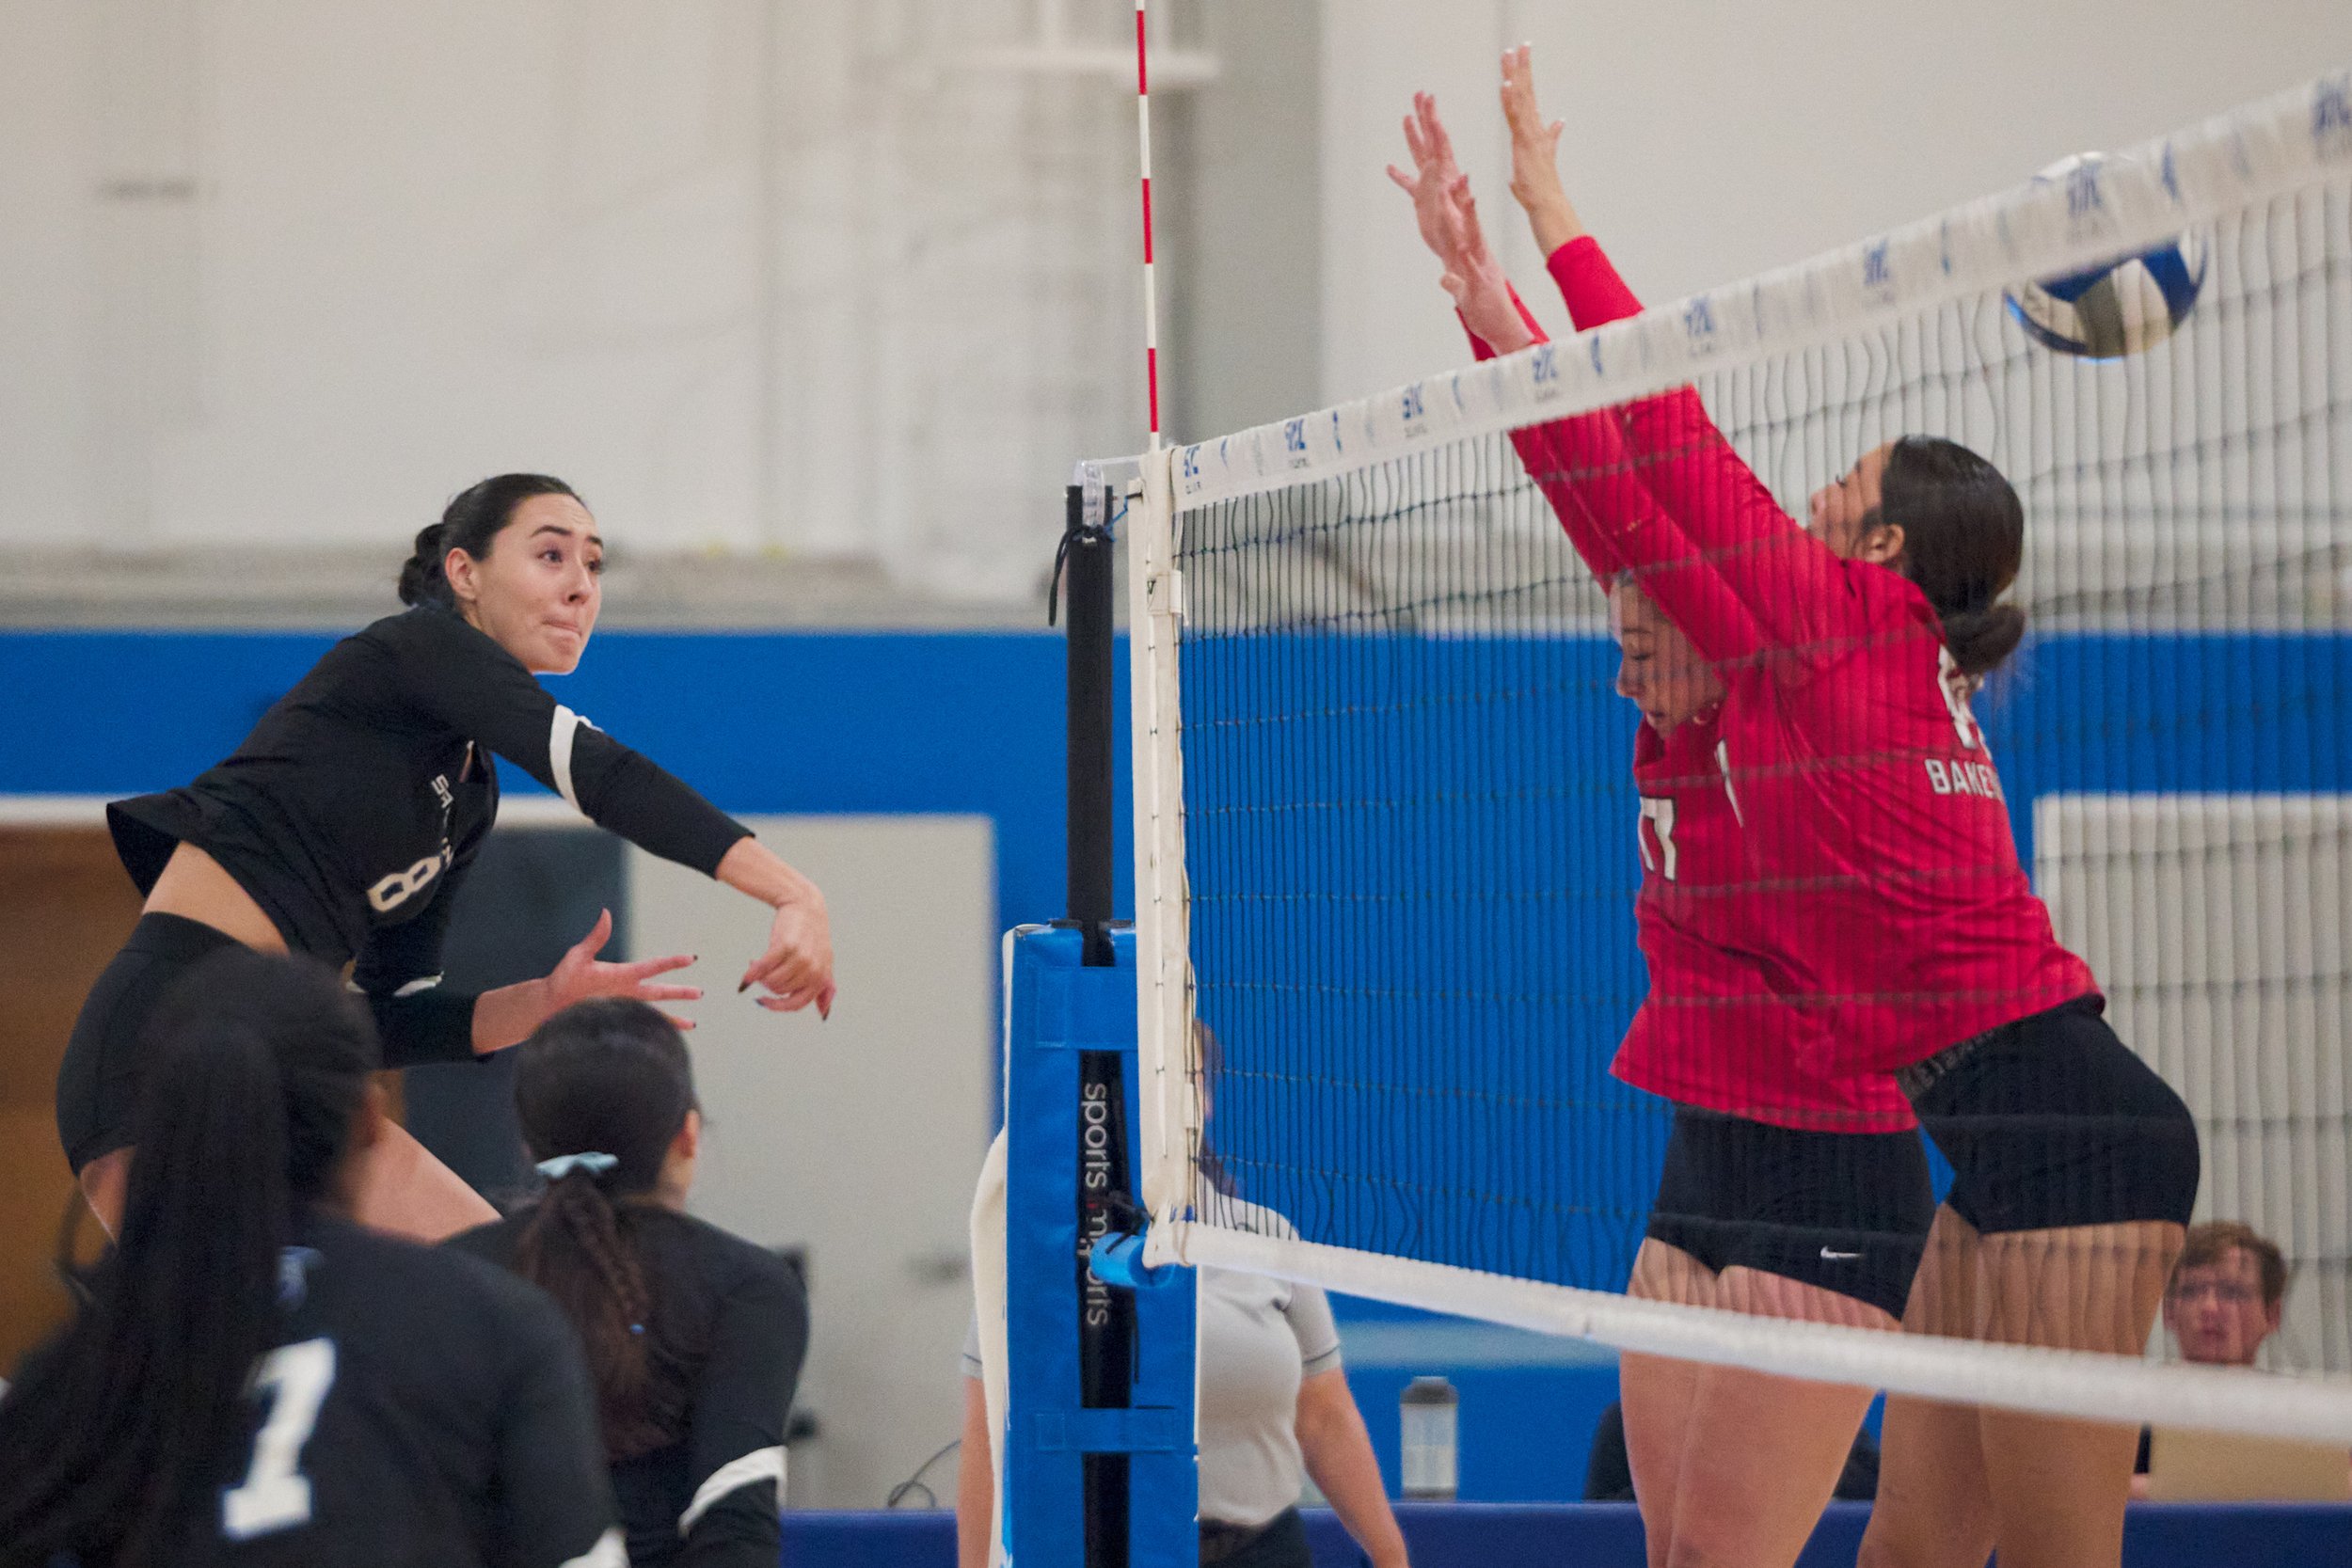  Santa Monica College Corsairs' Natalie Fernandez hits the ball past Bakersfield College Renegades' Aubree Dees and Haley Tedrow, scoring a kill, during the women's volleyball match on Wednesday, Nov. 1, 2023, at Corsair Gym in Santa Monica, Calif. T